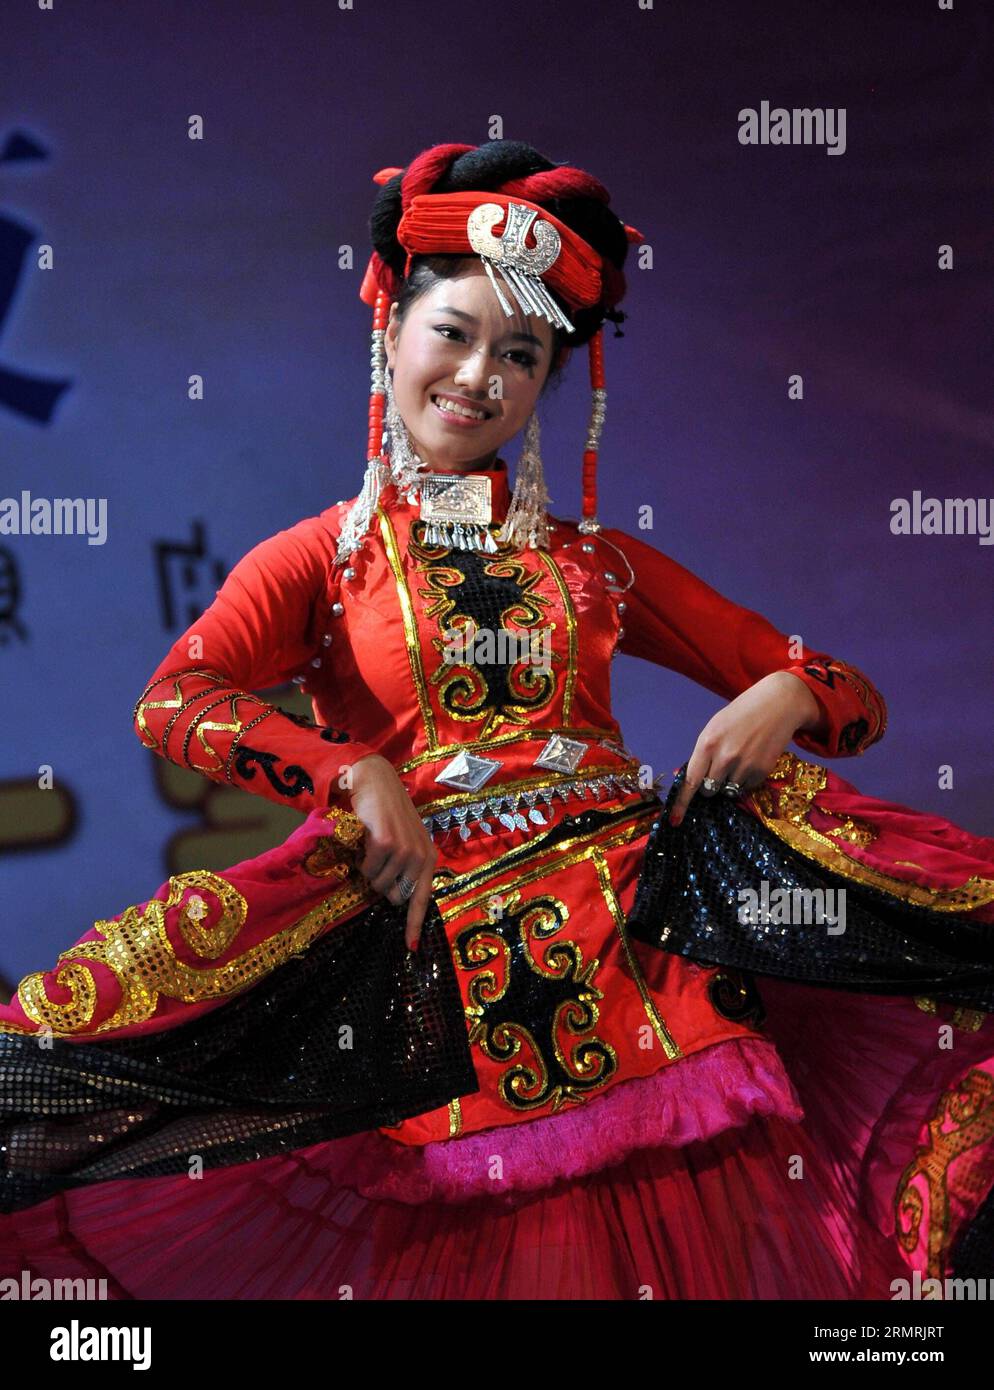 (140723) -- XICHANG, July 23, 2014 (Xinhua) -- A woman of the Yi ethnic group performs during a talent show of a traditional beauty contest at Xichang City, southwest China s Sichuan Province, July 23, 2014. The beauty contest is one of the most important activities during the annual Torch Festival at Liangshan Yi Autonomous Prefecture. It can date back to over 1,000 years ago in the history of the Yi ethnic group. (Xinhua/Xue Yubin)(wjq) CHINA-SICHUAN-YI ETHIC BEAUTY CONTEST (CN) PUBLICATIONxNOTxINxCHN   Xichang July 23 2014 XINHUA a Woman of The Yi Ethnic Group performs during a Talent Show Stock Photo